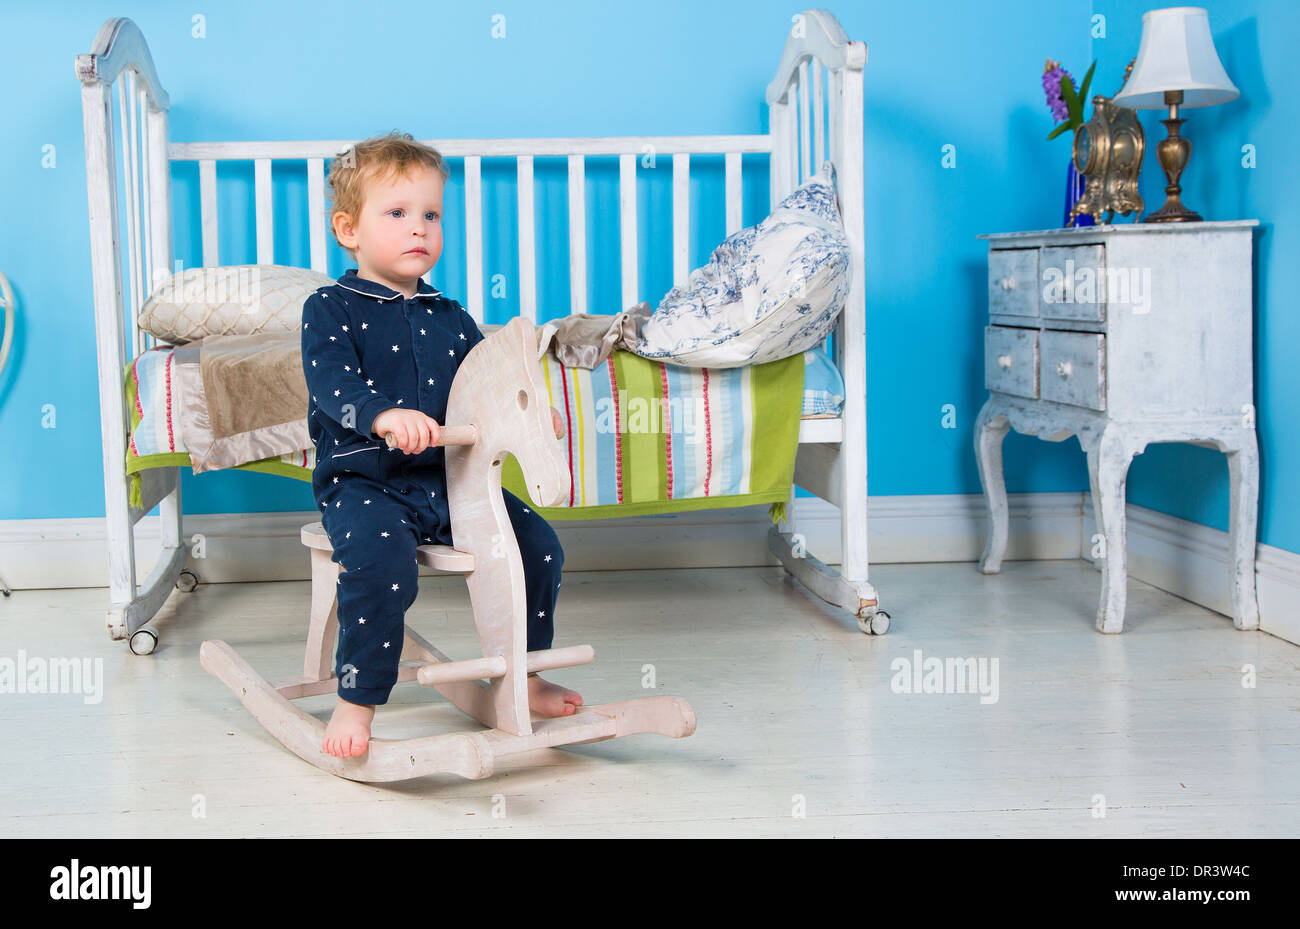 Child play with a wooden Rocking Toy horse pony. Stock Photo